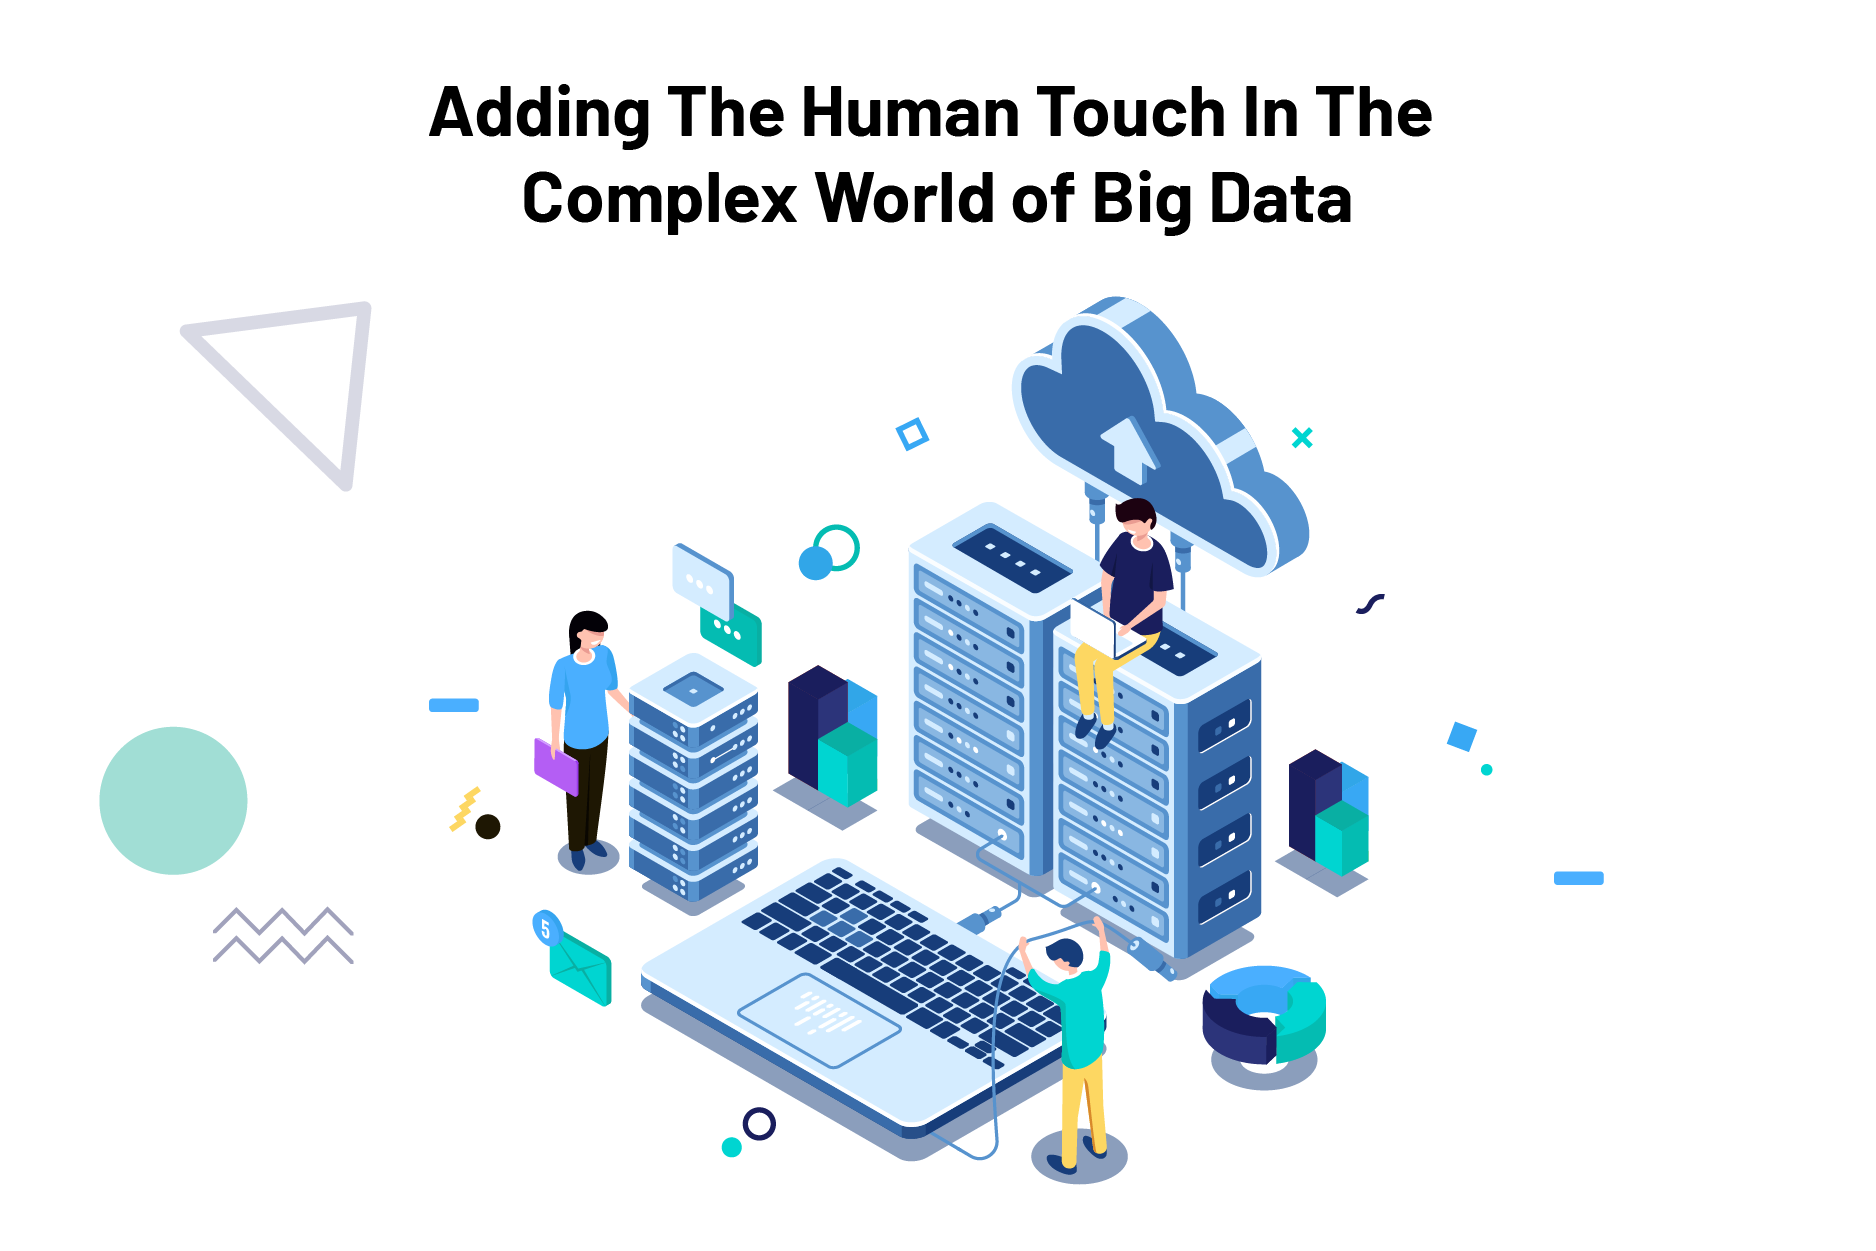 The Human Touch In The Complex World of Big Data-09